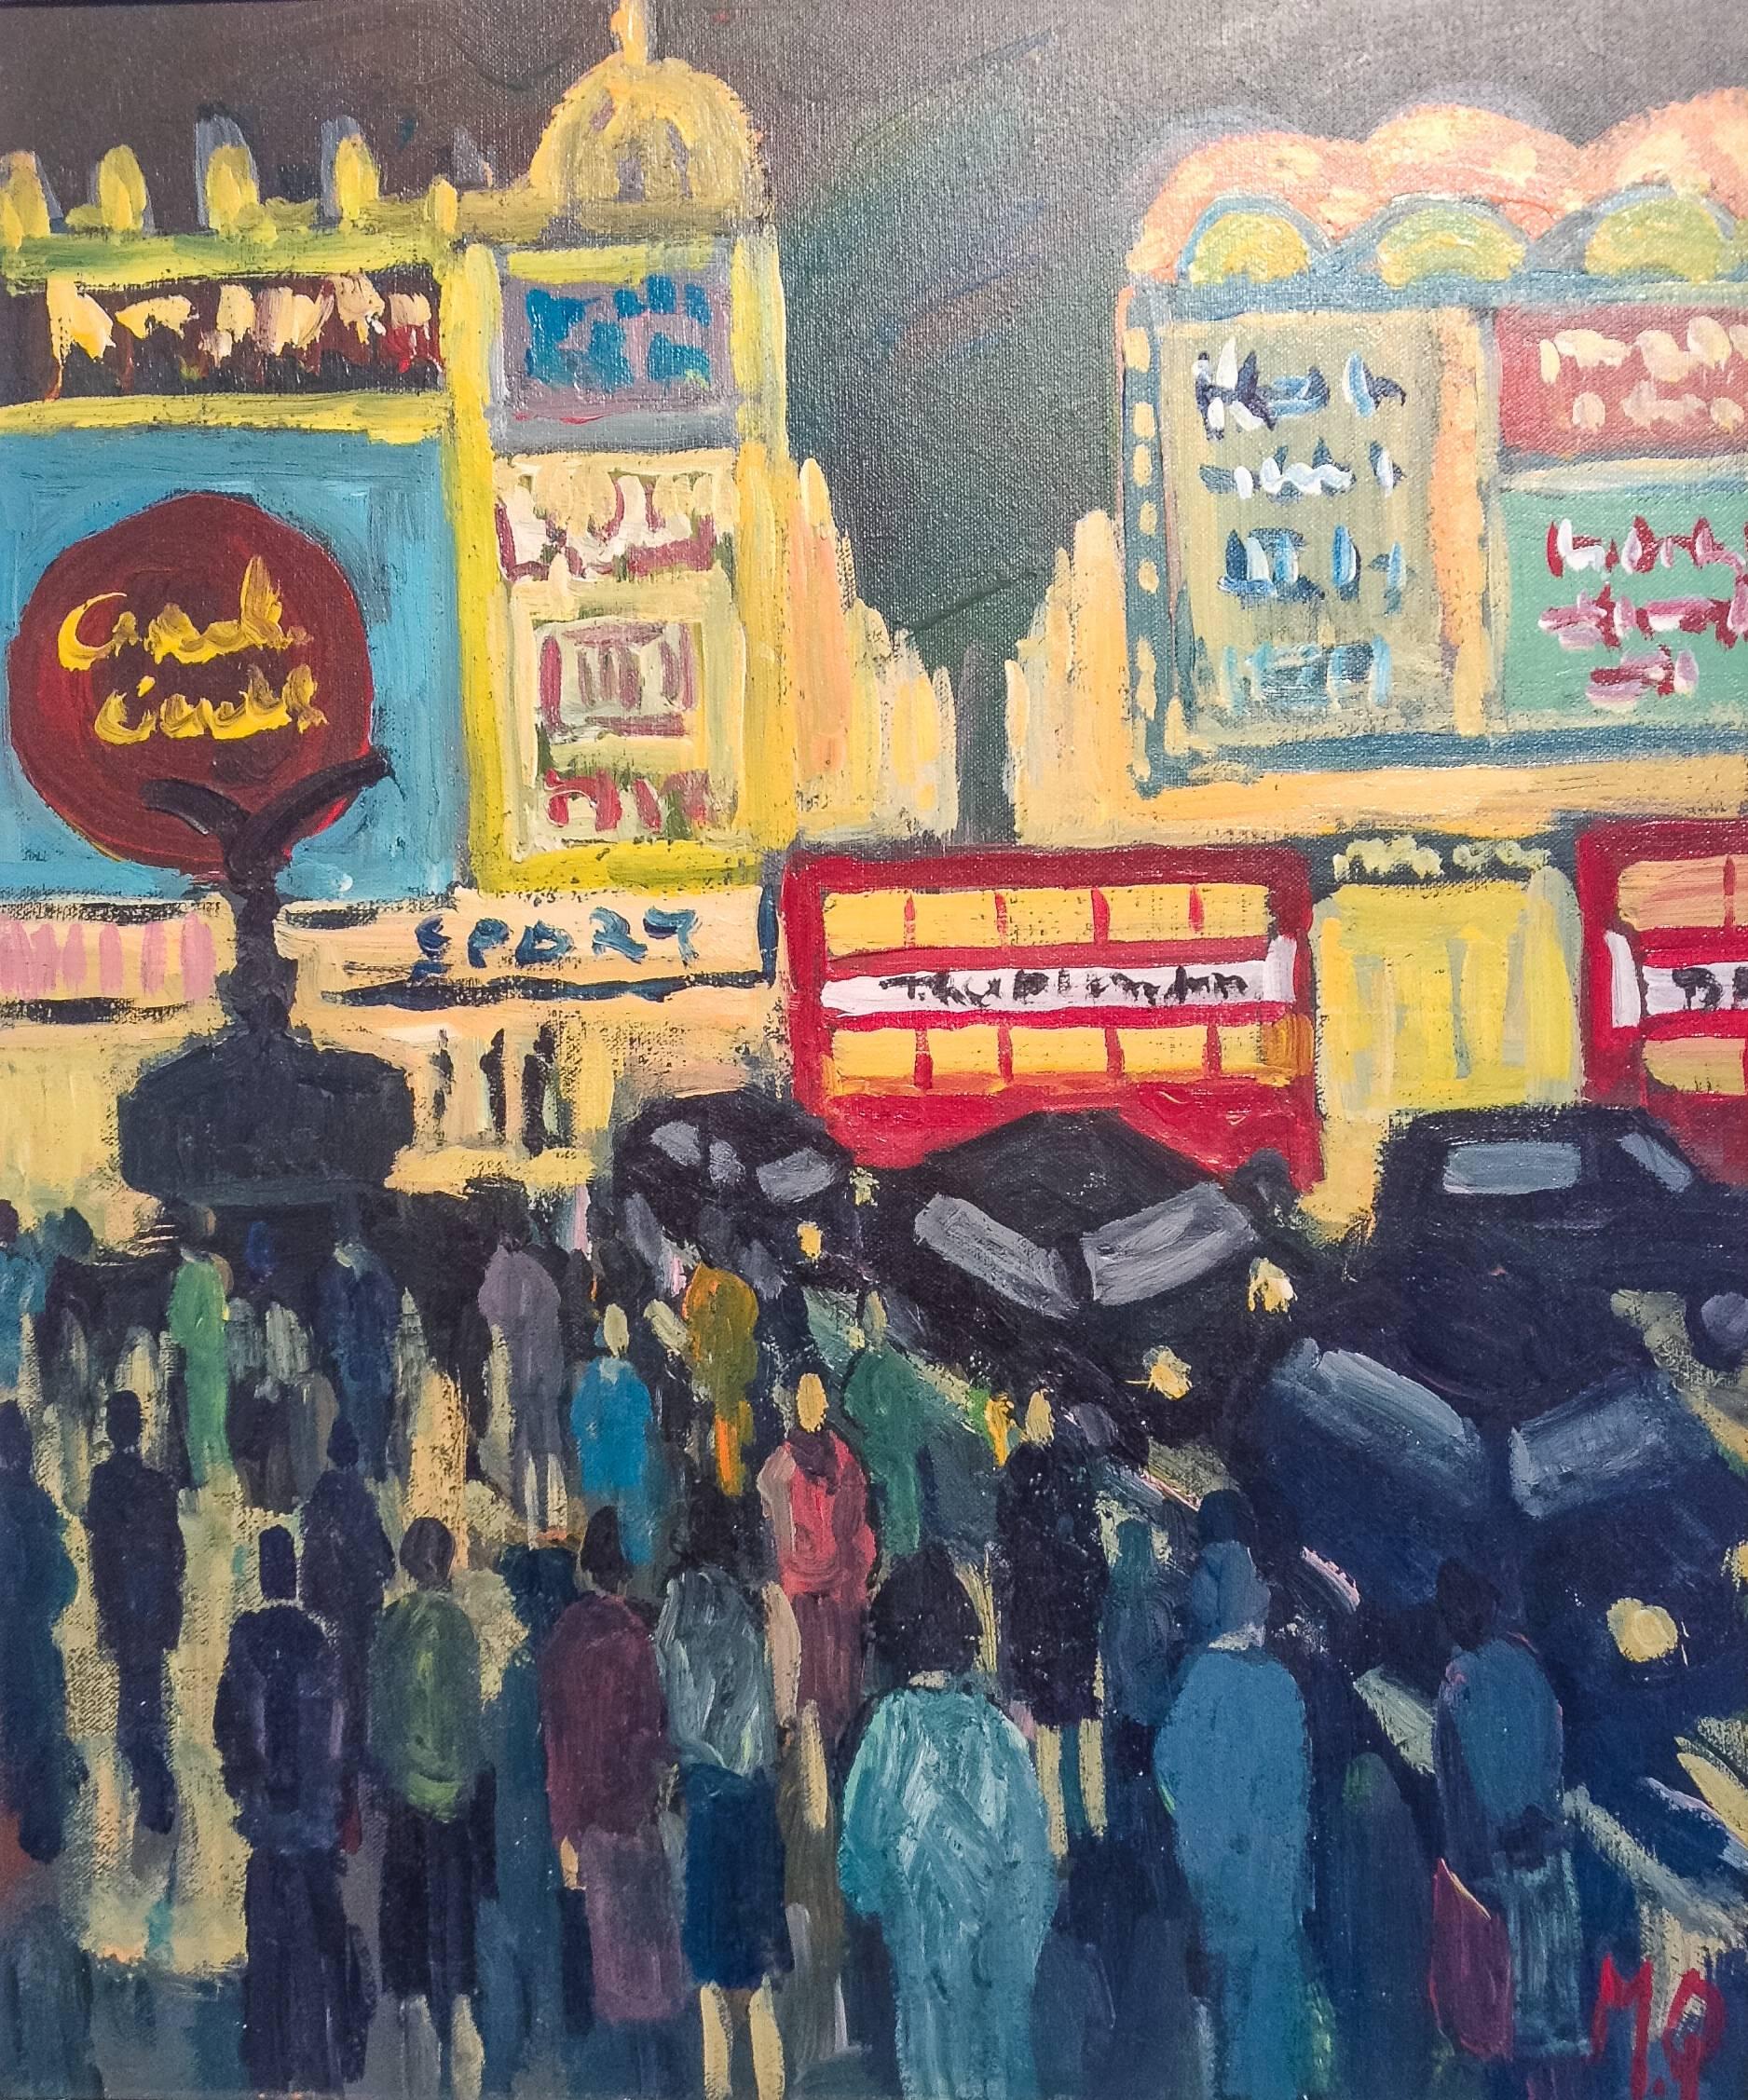 Michael Quirke Abstract Painting - Rush Hour - London cityscape Abstract Figurative Landscape oil painting modern